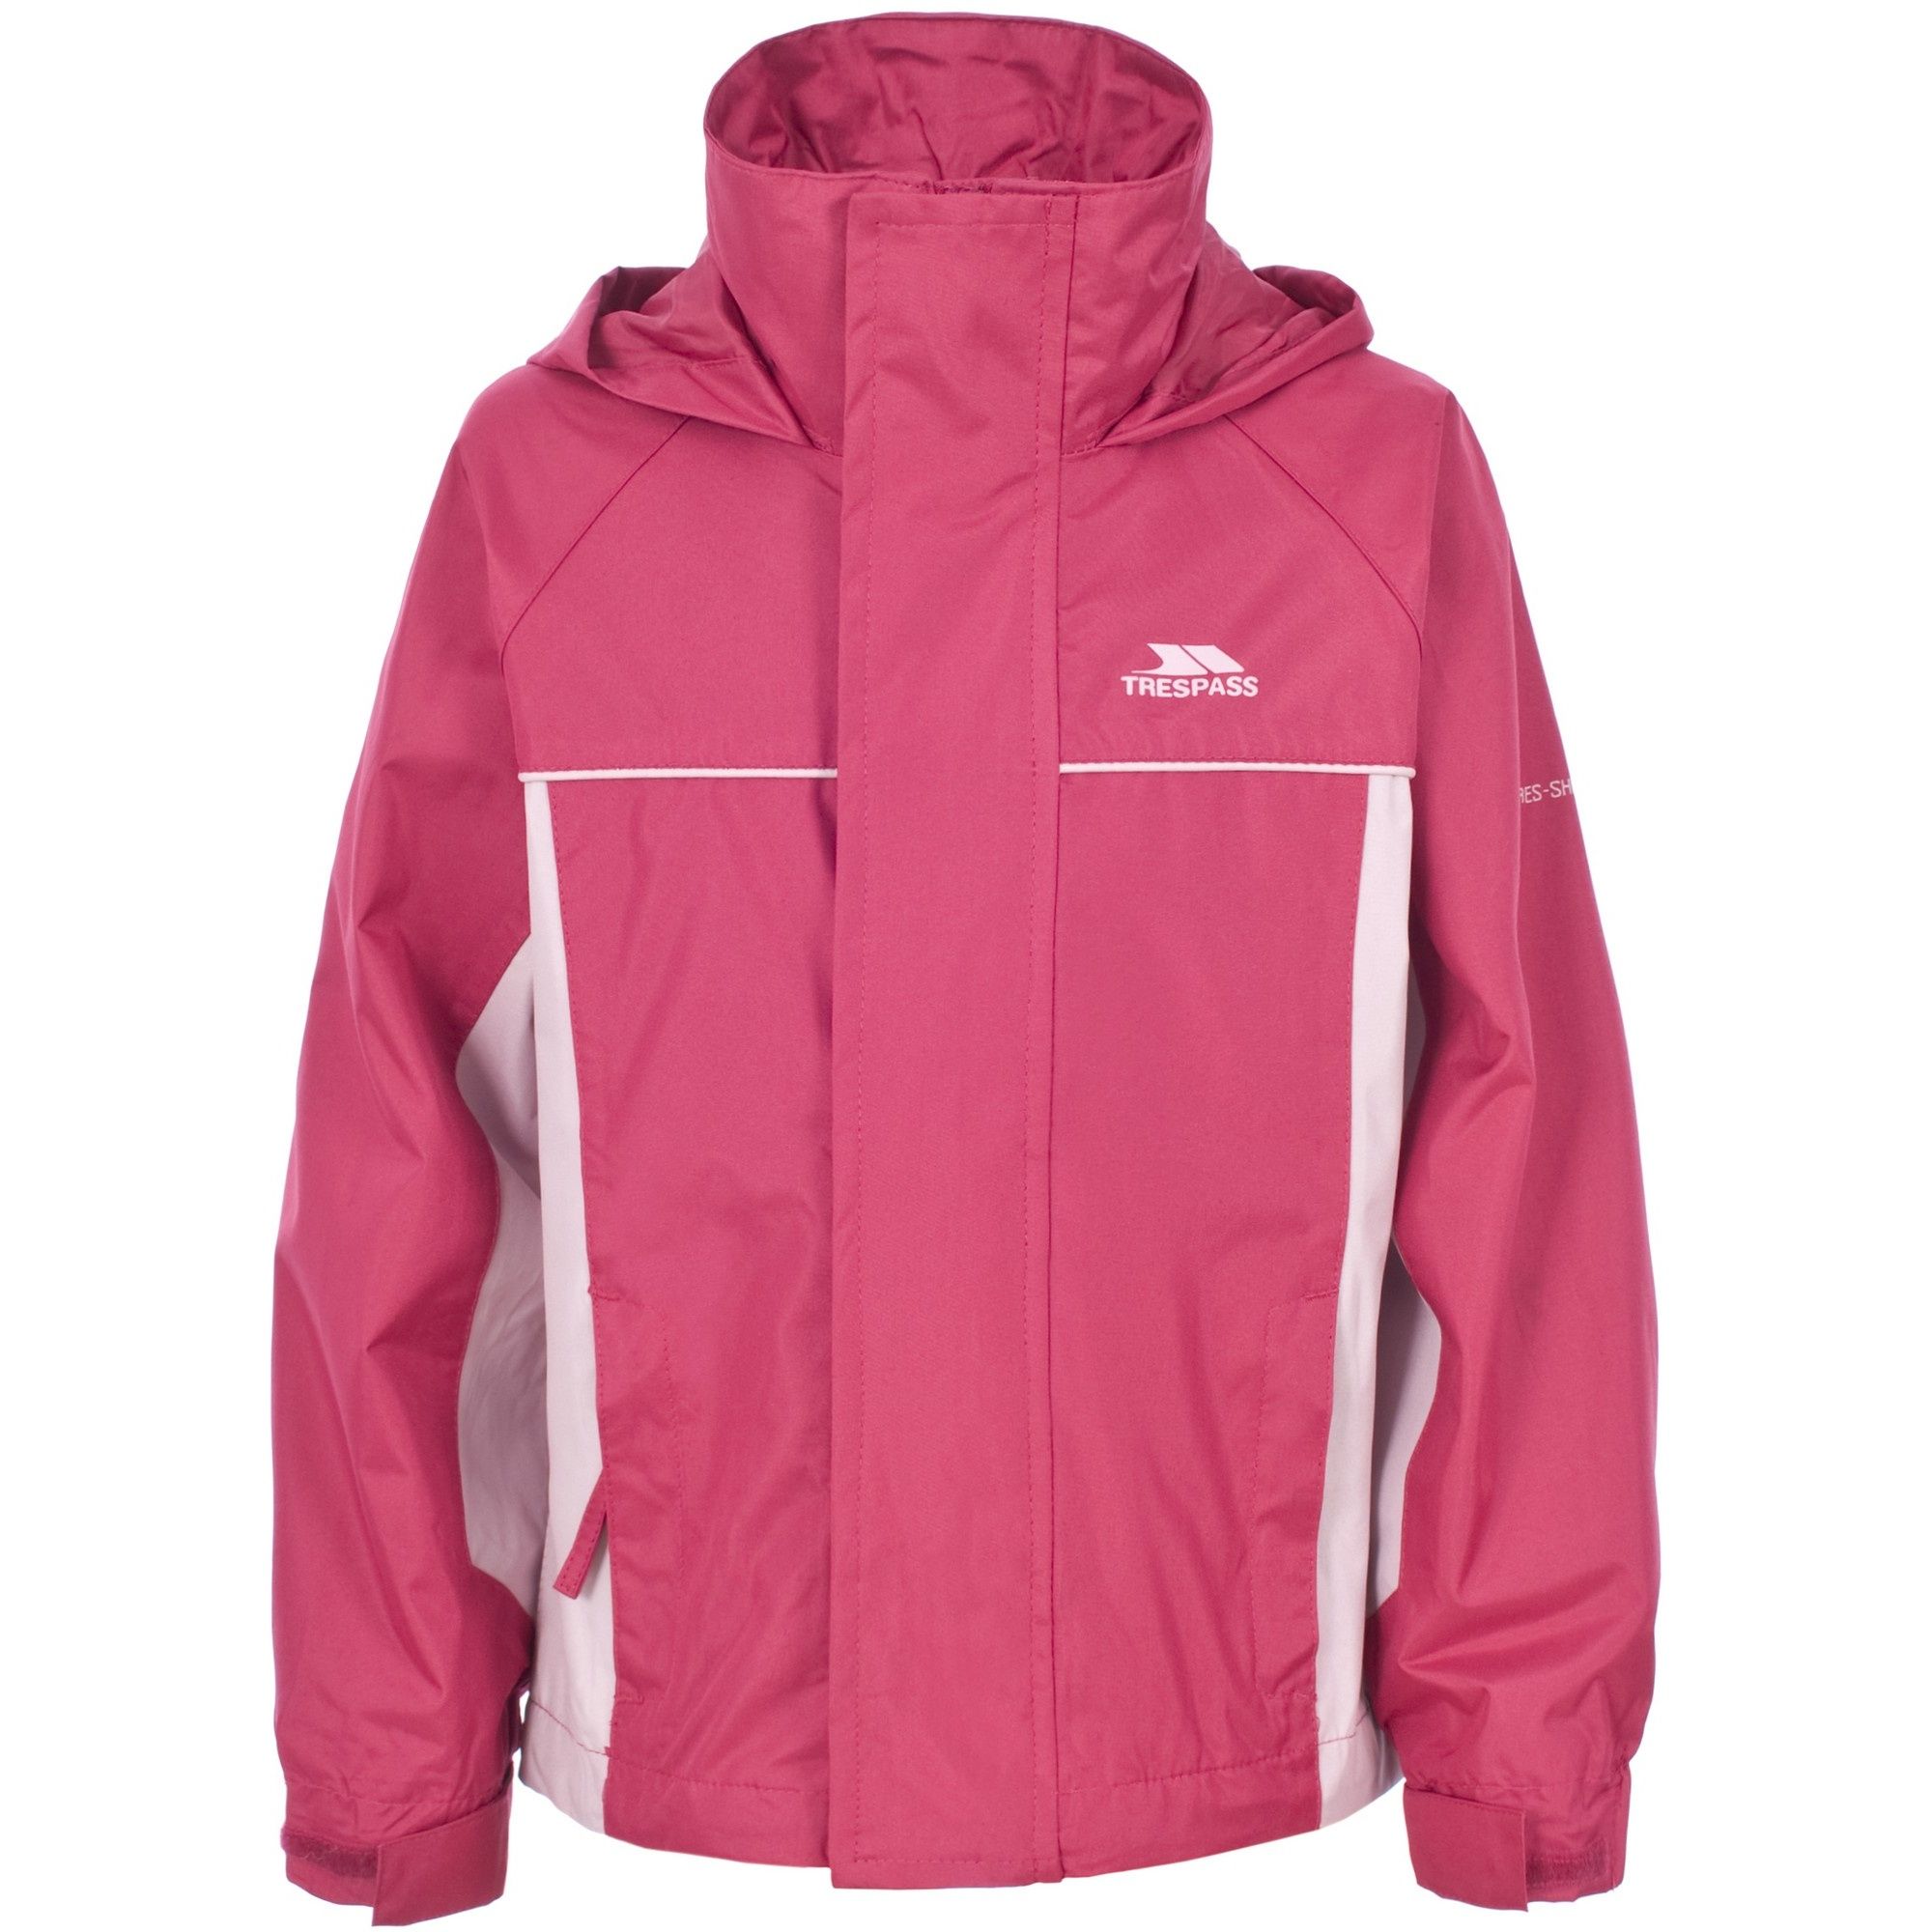 Girls hooded full zip jacket. Waterproof 3000mm. Windproof. Storm flap. Adjustable concealed hood. 2 Pockets. Elasticated cuff with adjustable touch fastening tab. Hem drawcord. Shell: 100% Polyester With PVC Coating, Mesh Lining: 100% Polyester.